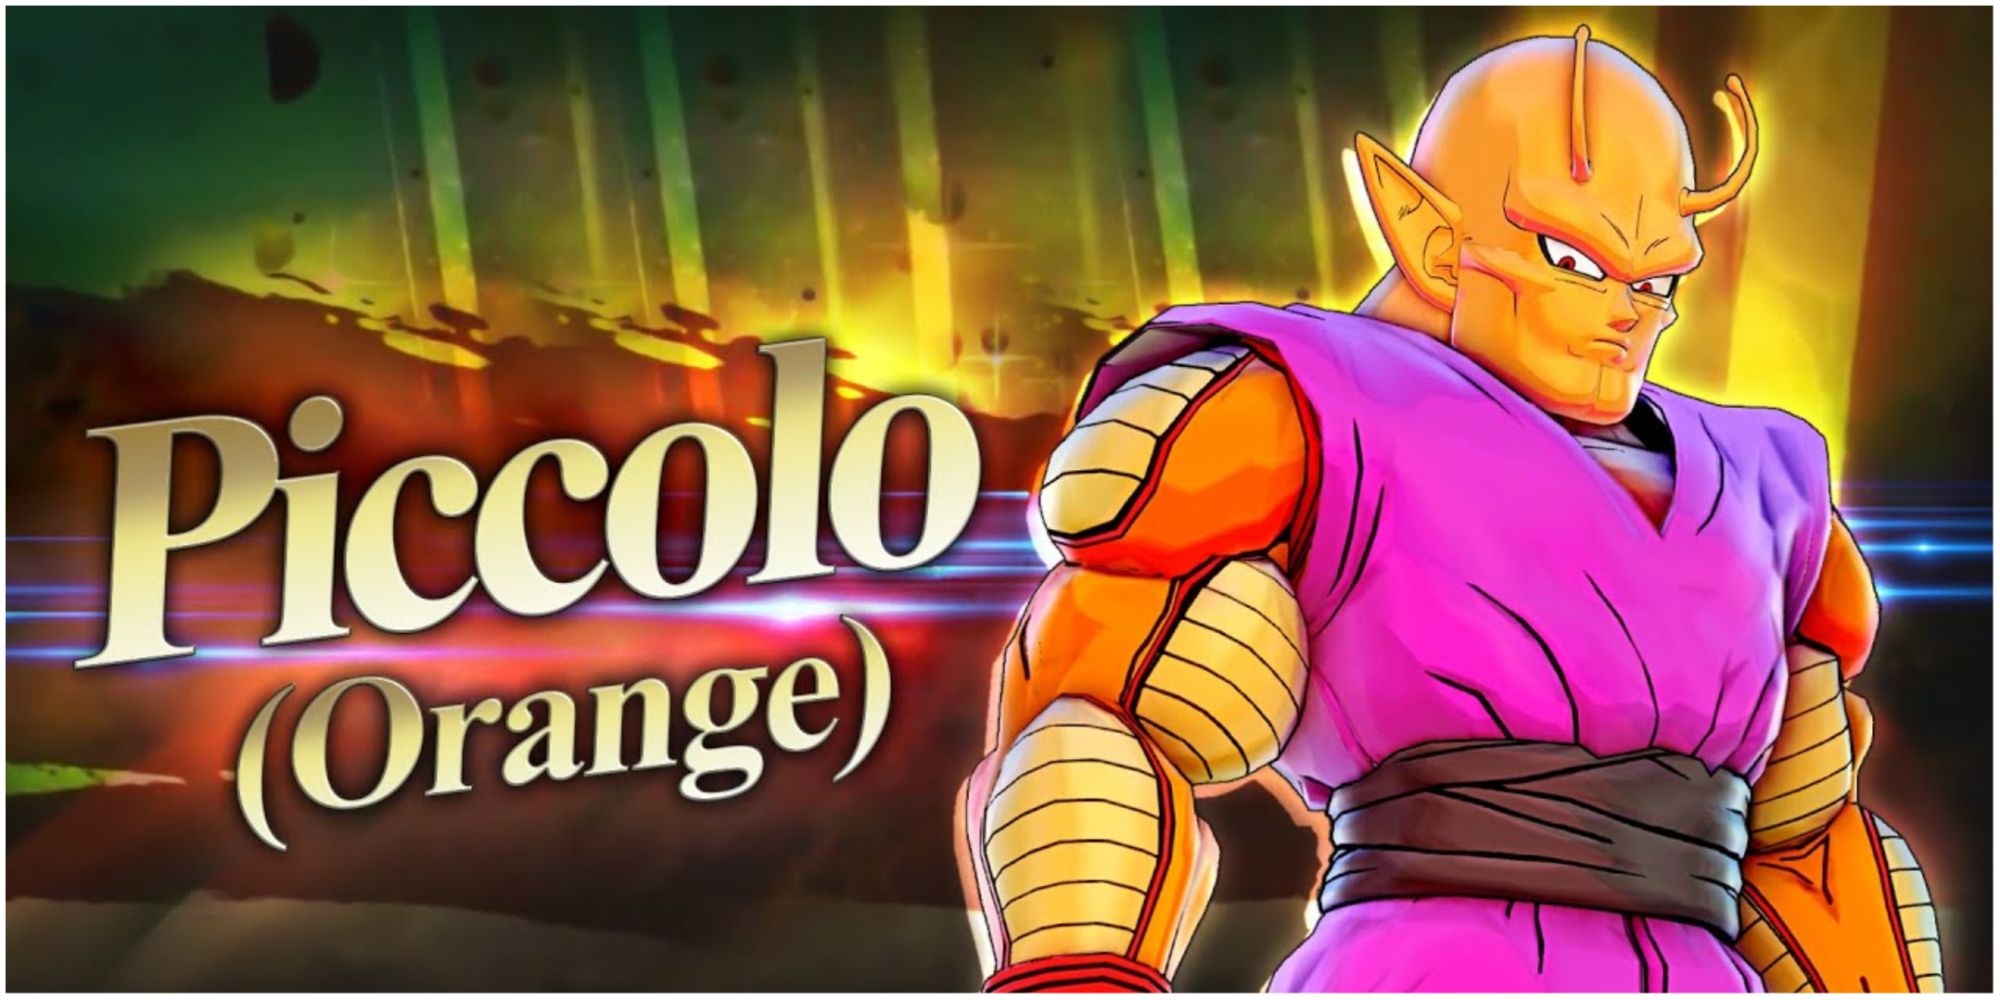 Banner image for Orange Piccolo being added into Dragon Ball Xenoverse 2